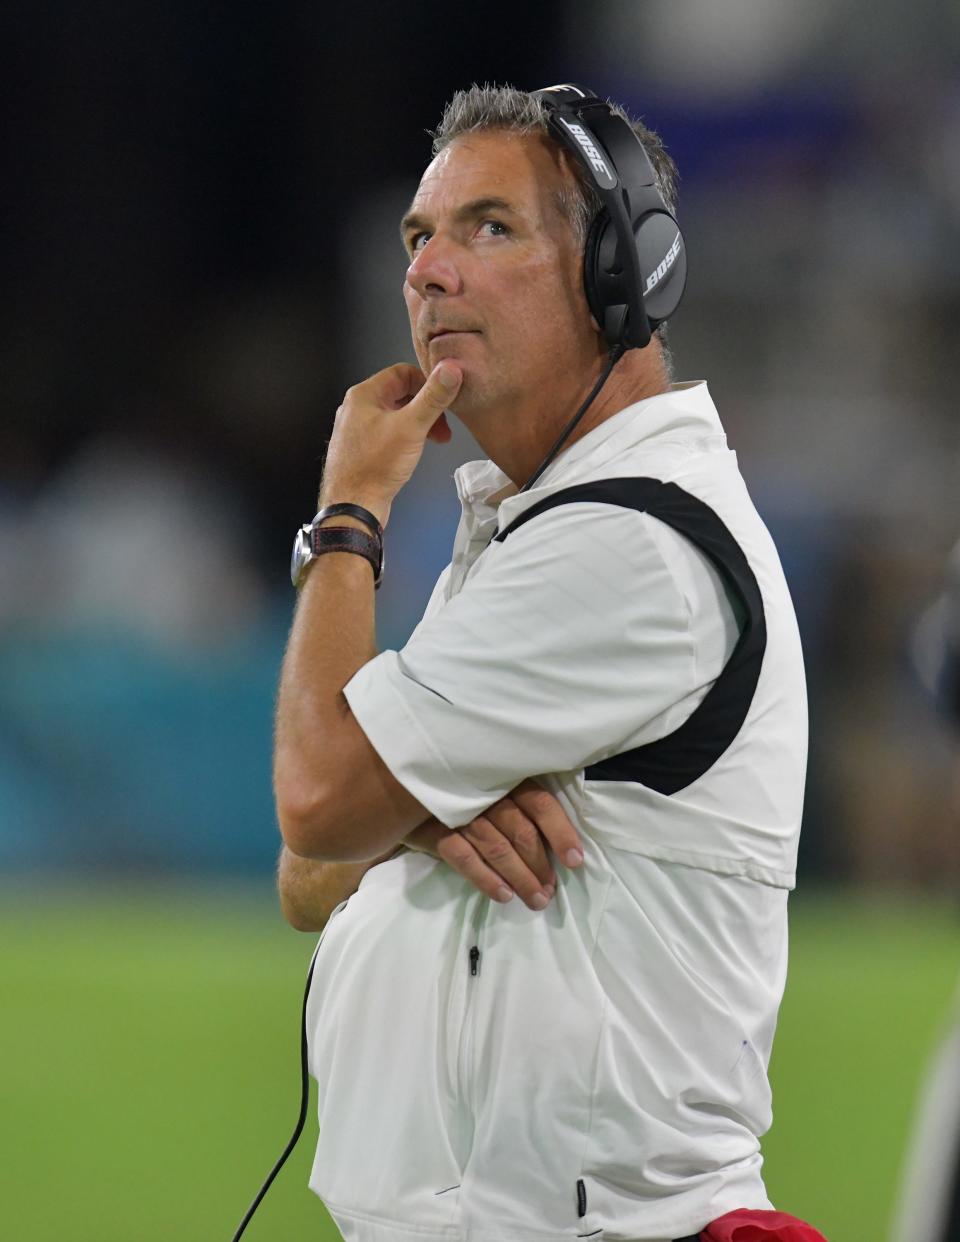 Urban Meyer looks at the scoreboard during a preseason game against Cleveland. After just a 336-day tenure in his first NFL job as the Jaguars' head coach, Meyer faces an uncertain future as to where or when he might resurface in the profession.